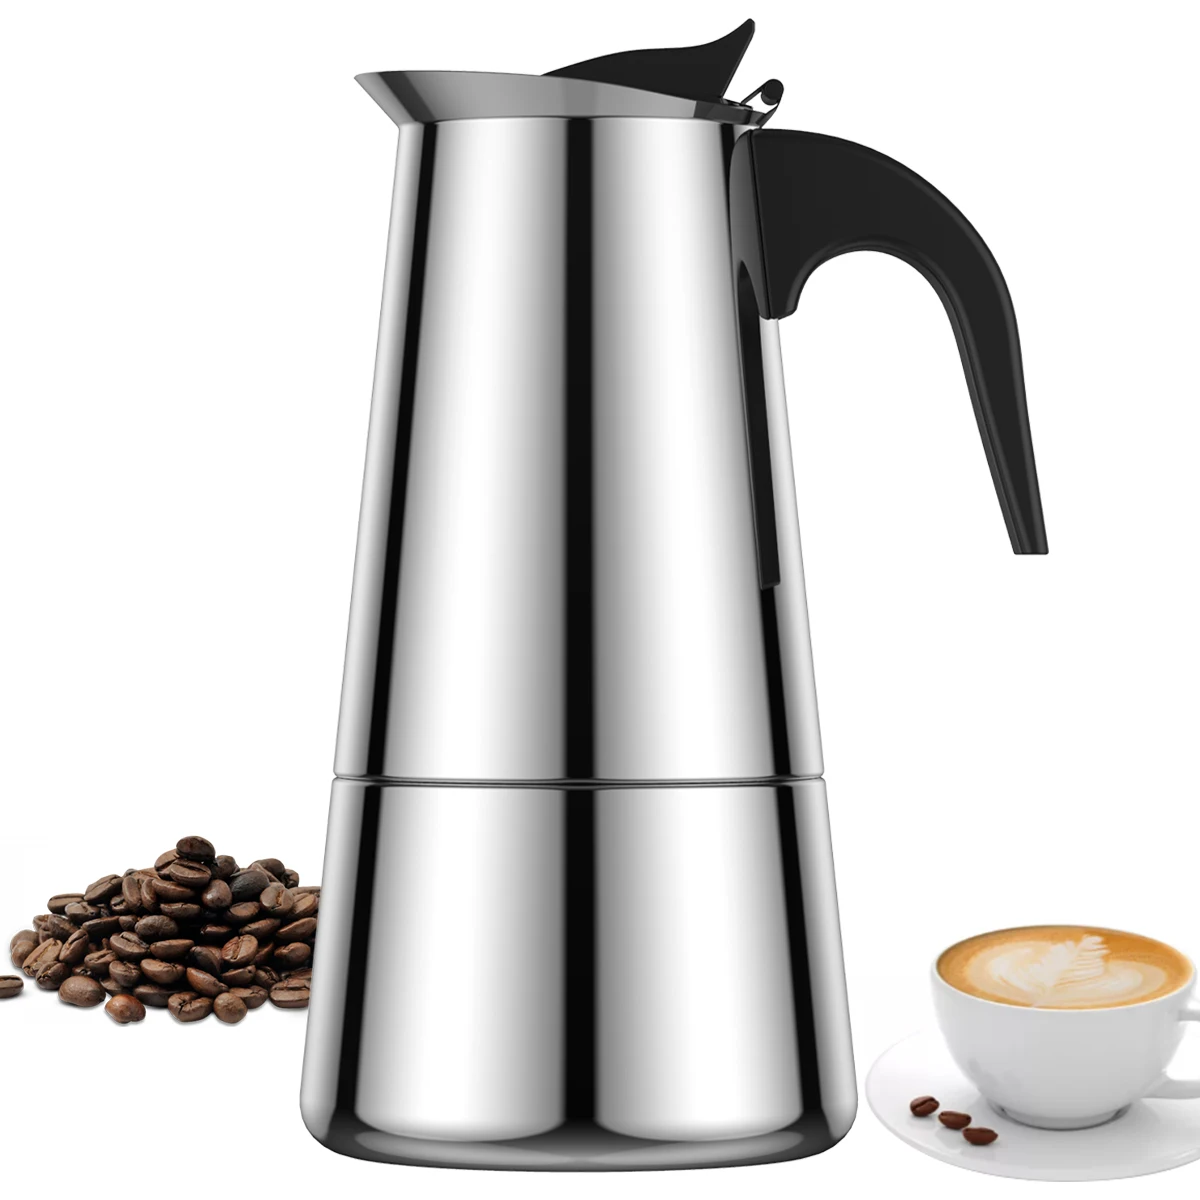 

Espresso Maker Induction Coffee Maker Stainless Steel Stovetop Coffee Maker Moka Pot 200ml/4 Cup Portable Coffee Maker Pot